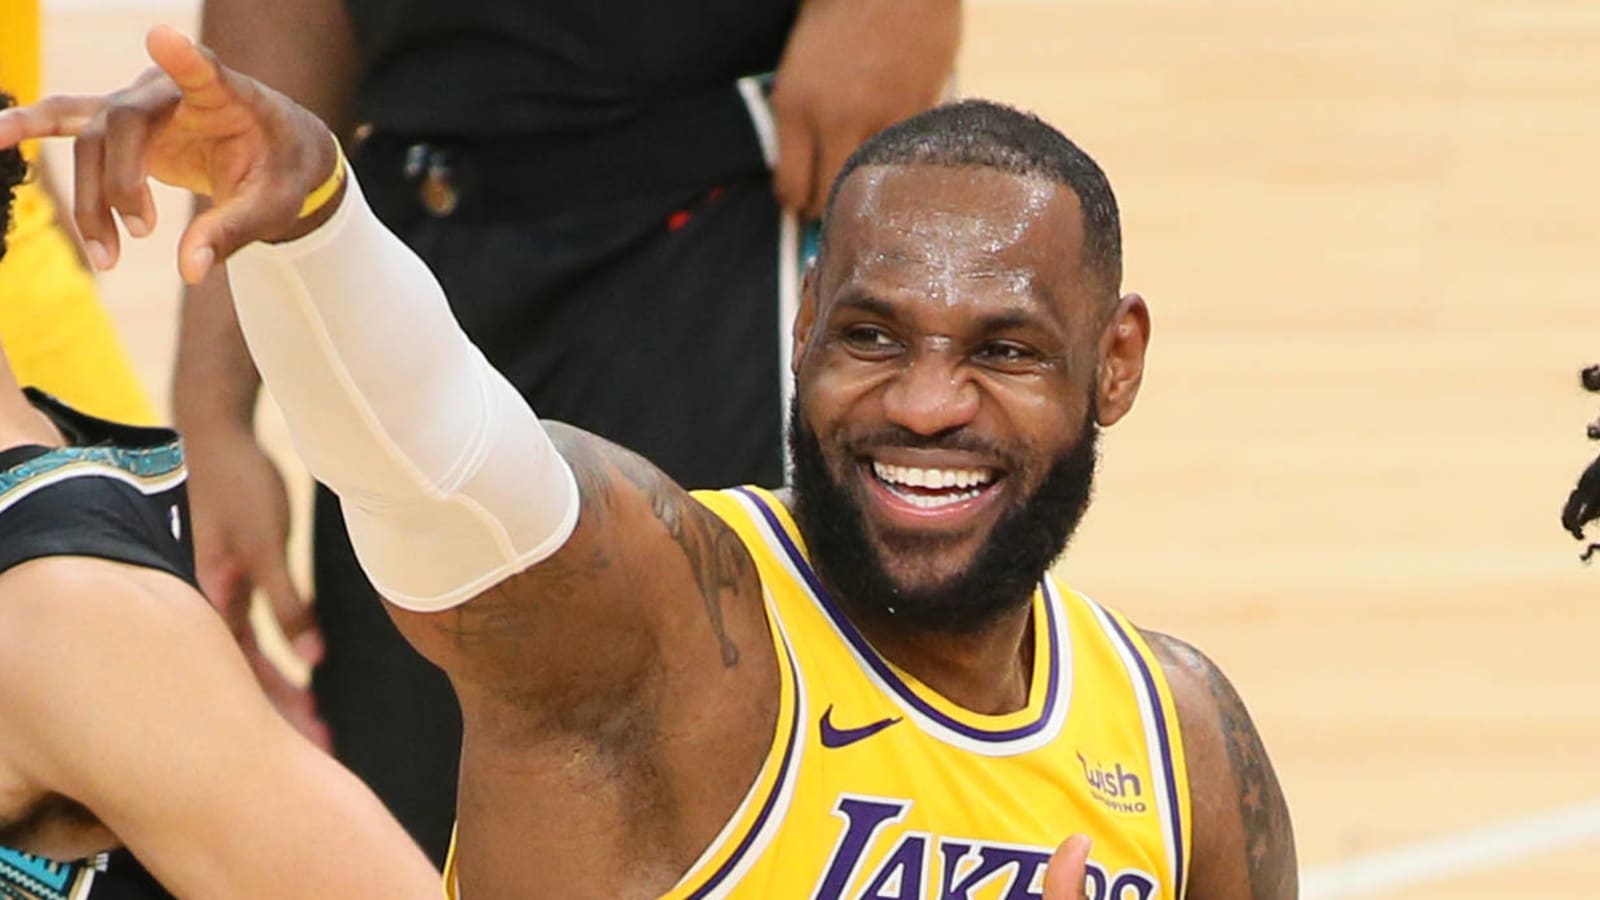 LeBron reacts to video imagining his reaction to Harden trade